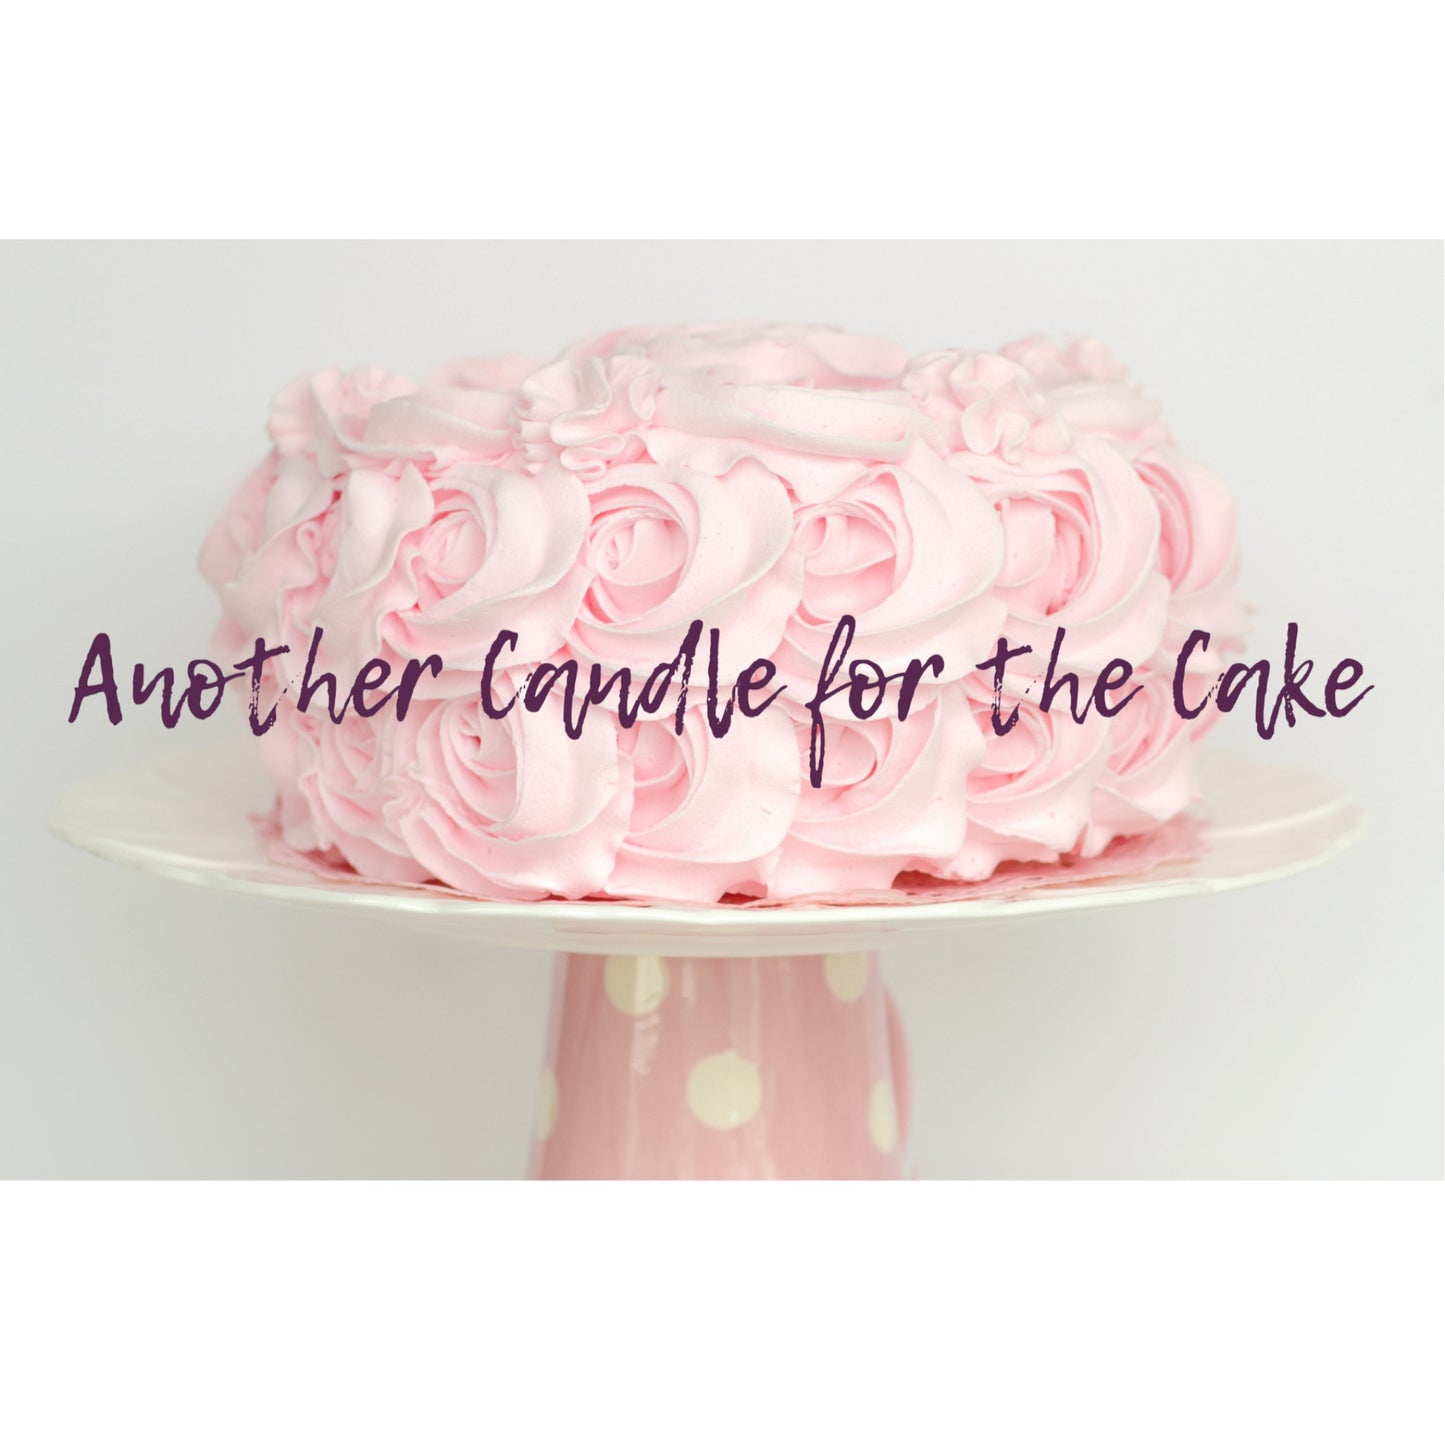 Another Candle for the Cake 8.5x5.5 Greeting Card, Digital Download